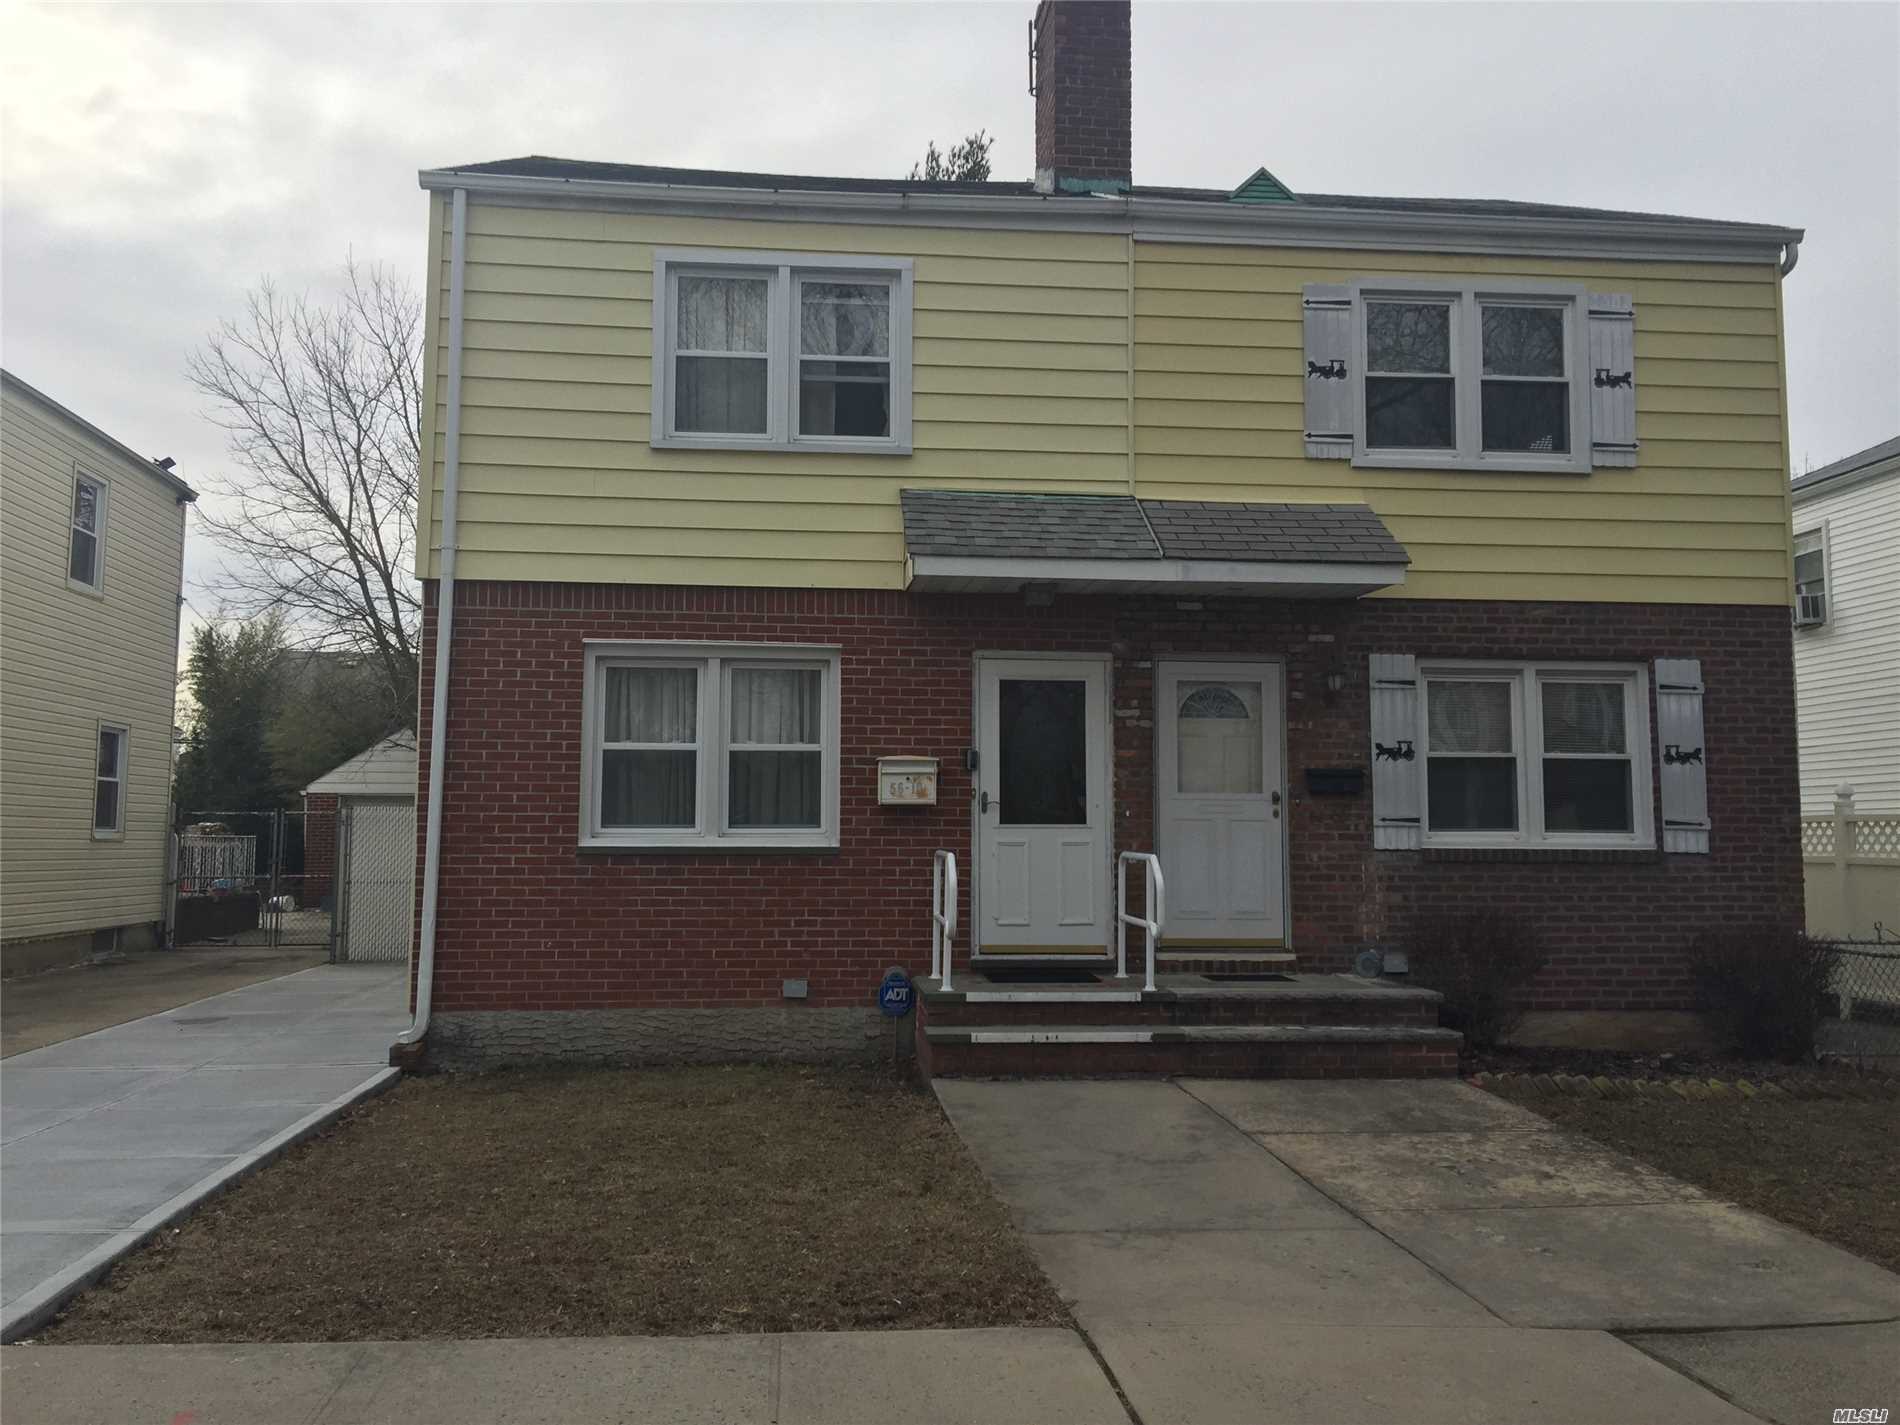 R3-1 Zoning!!!, Location, Location, Location, Beautiful Block In The Heart Of Fresh Meadows. Mint Condition House Facing East Exposure.